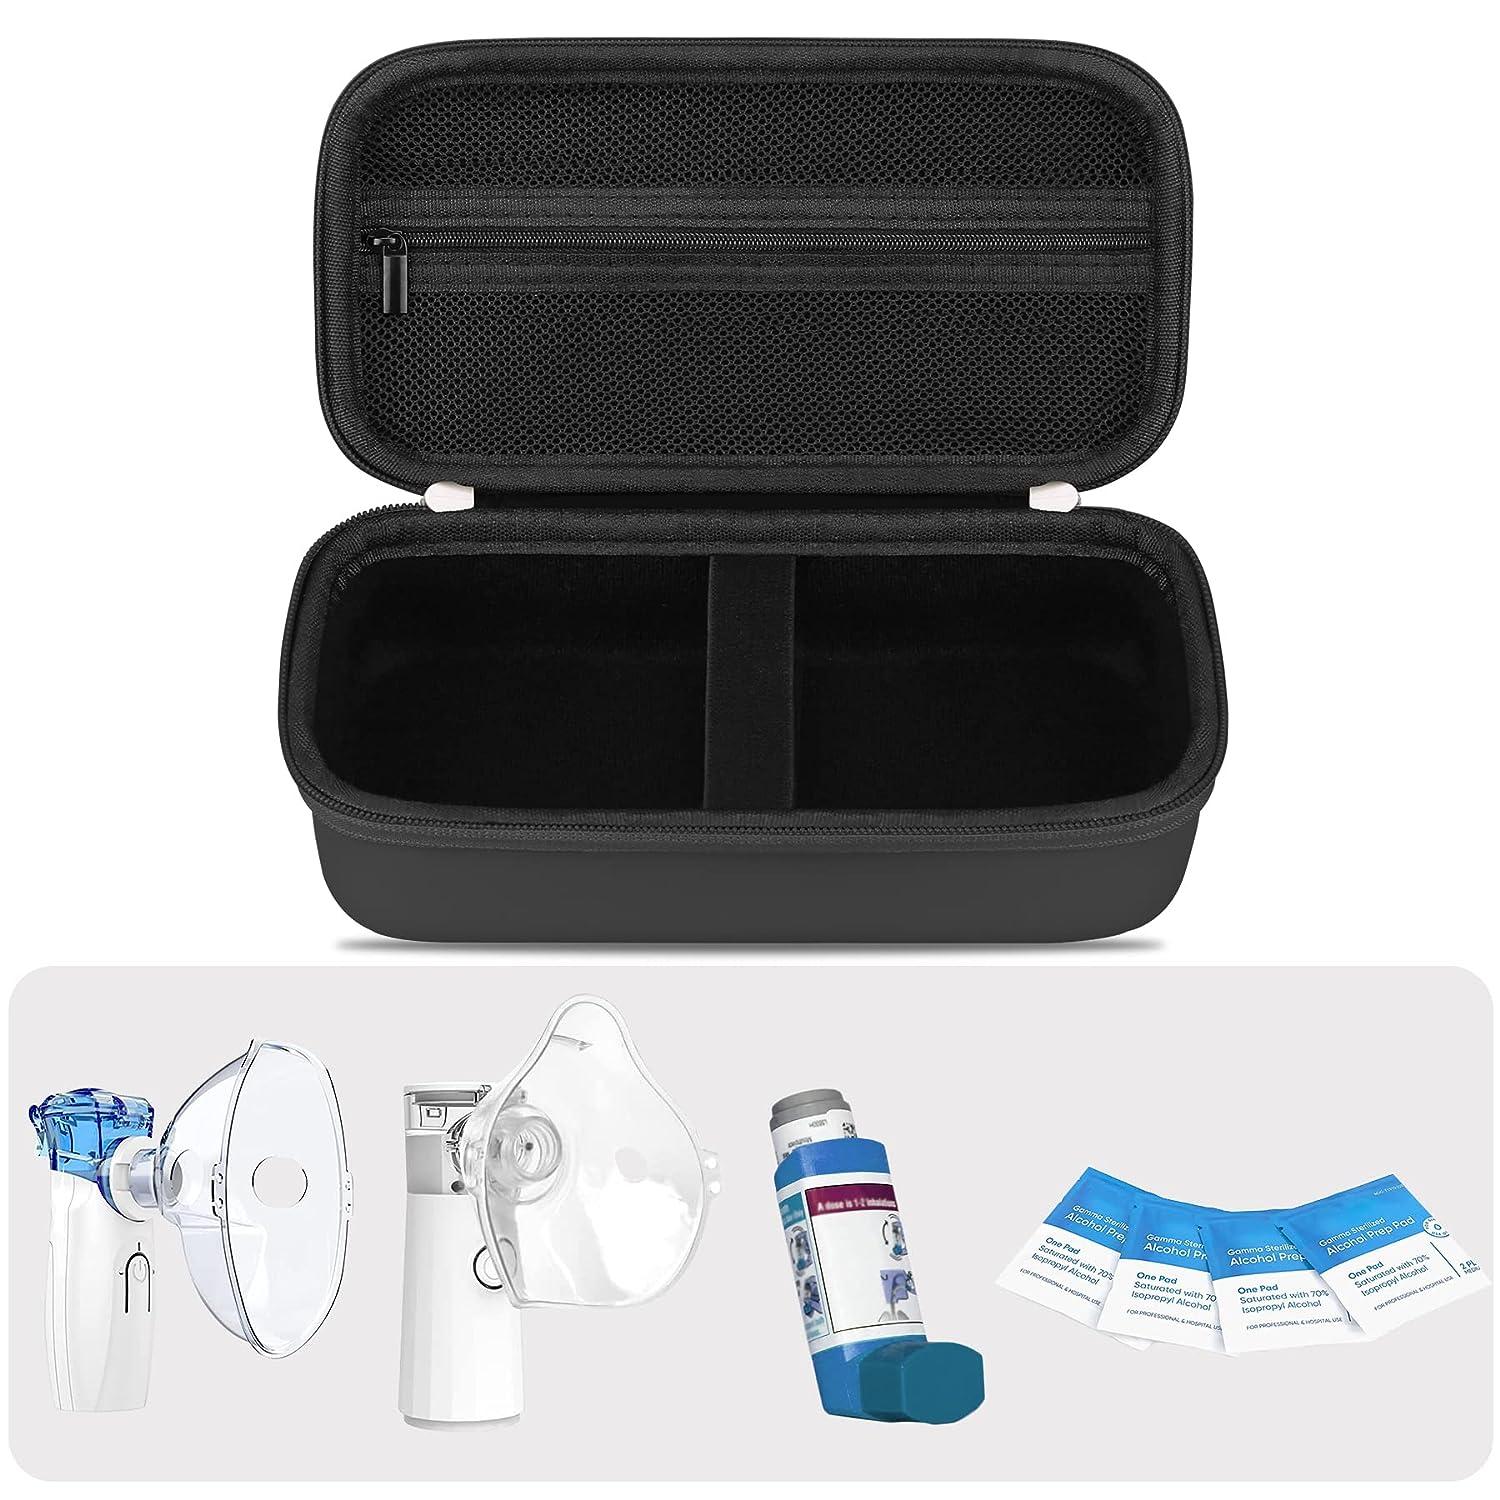 Nousziel Carrying Case for Portable Nebulizer, Asthma Nebulizer Machine  Carry Bag,Hard Travel Inhaler Case for Kids and Adults,Mini First Aid Kit